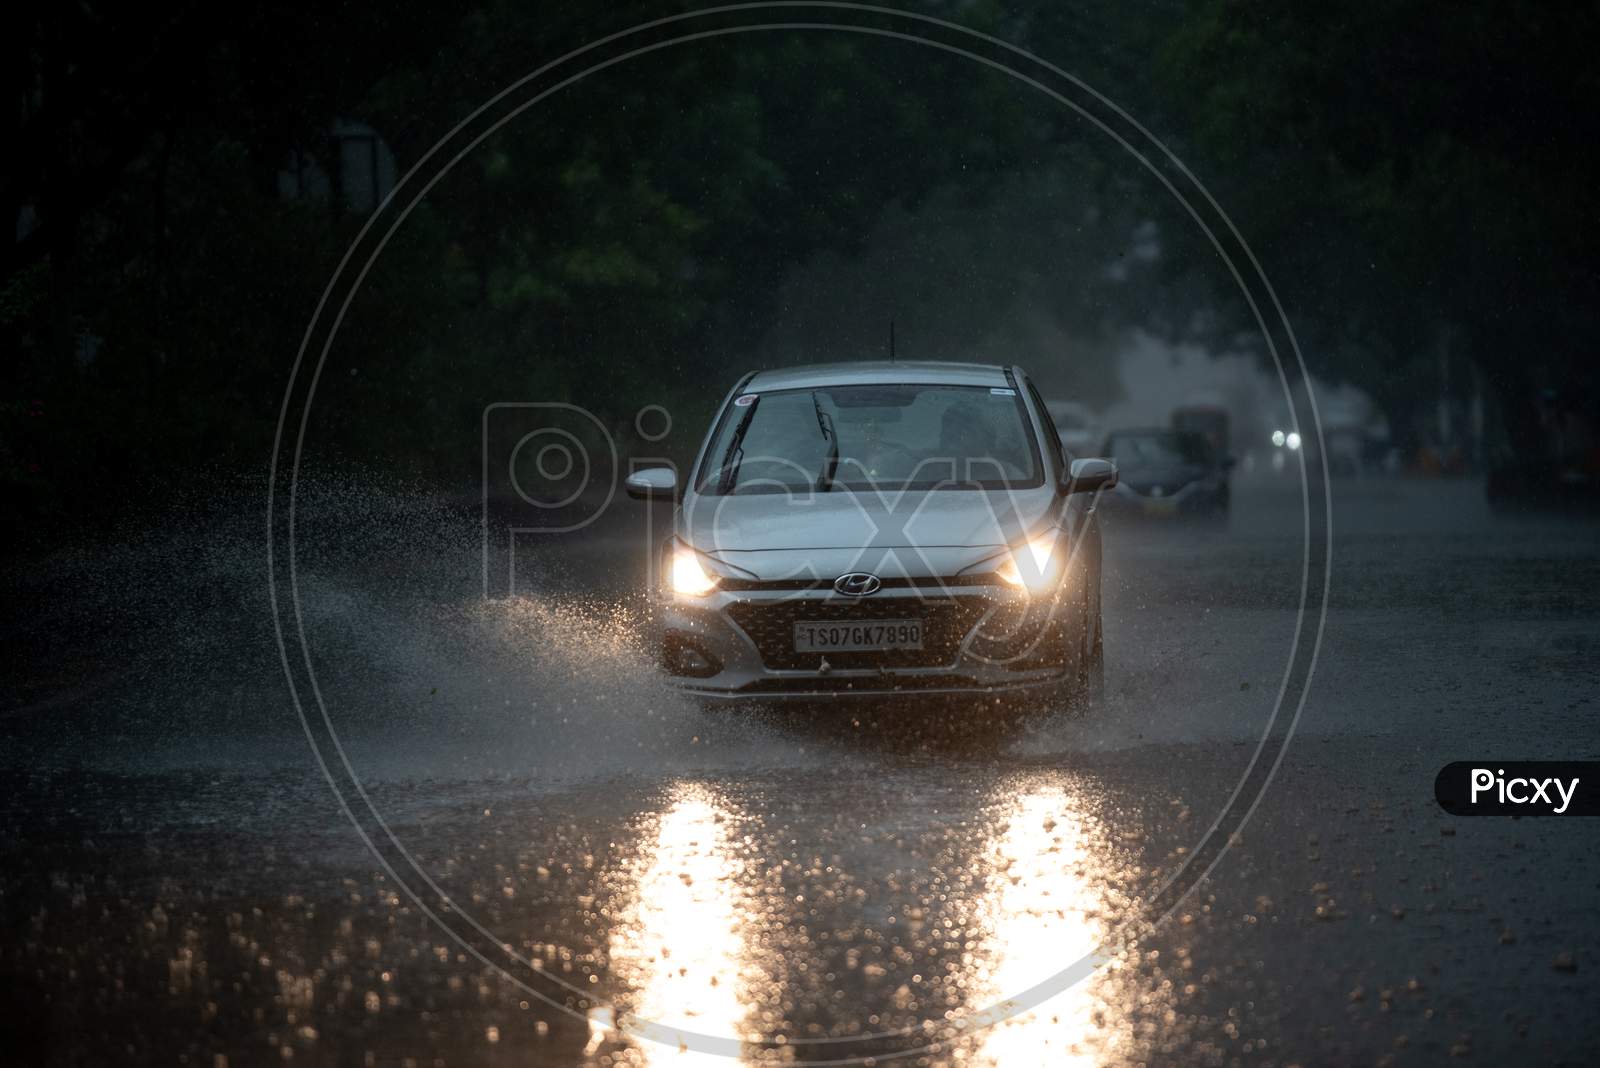 Heavy rains and gusty winds lashes several parts in Hyderabad on May 31, 2020.